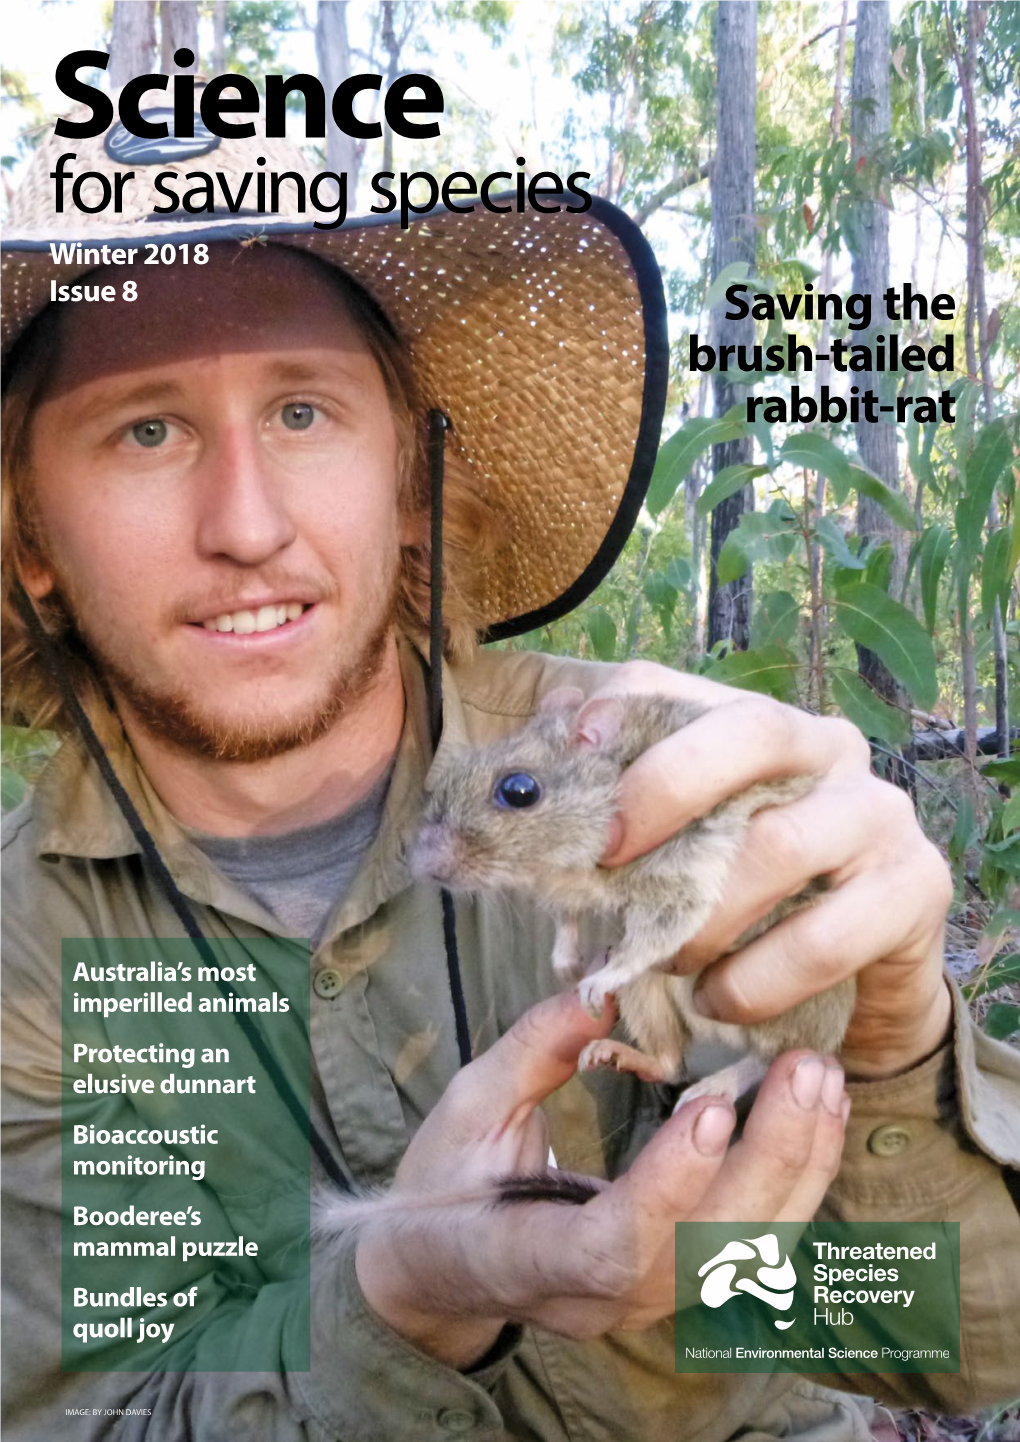 For Saving Species Winter 2018 Issue 8 Saving the Brush-Tailed Rabbit-Rat